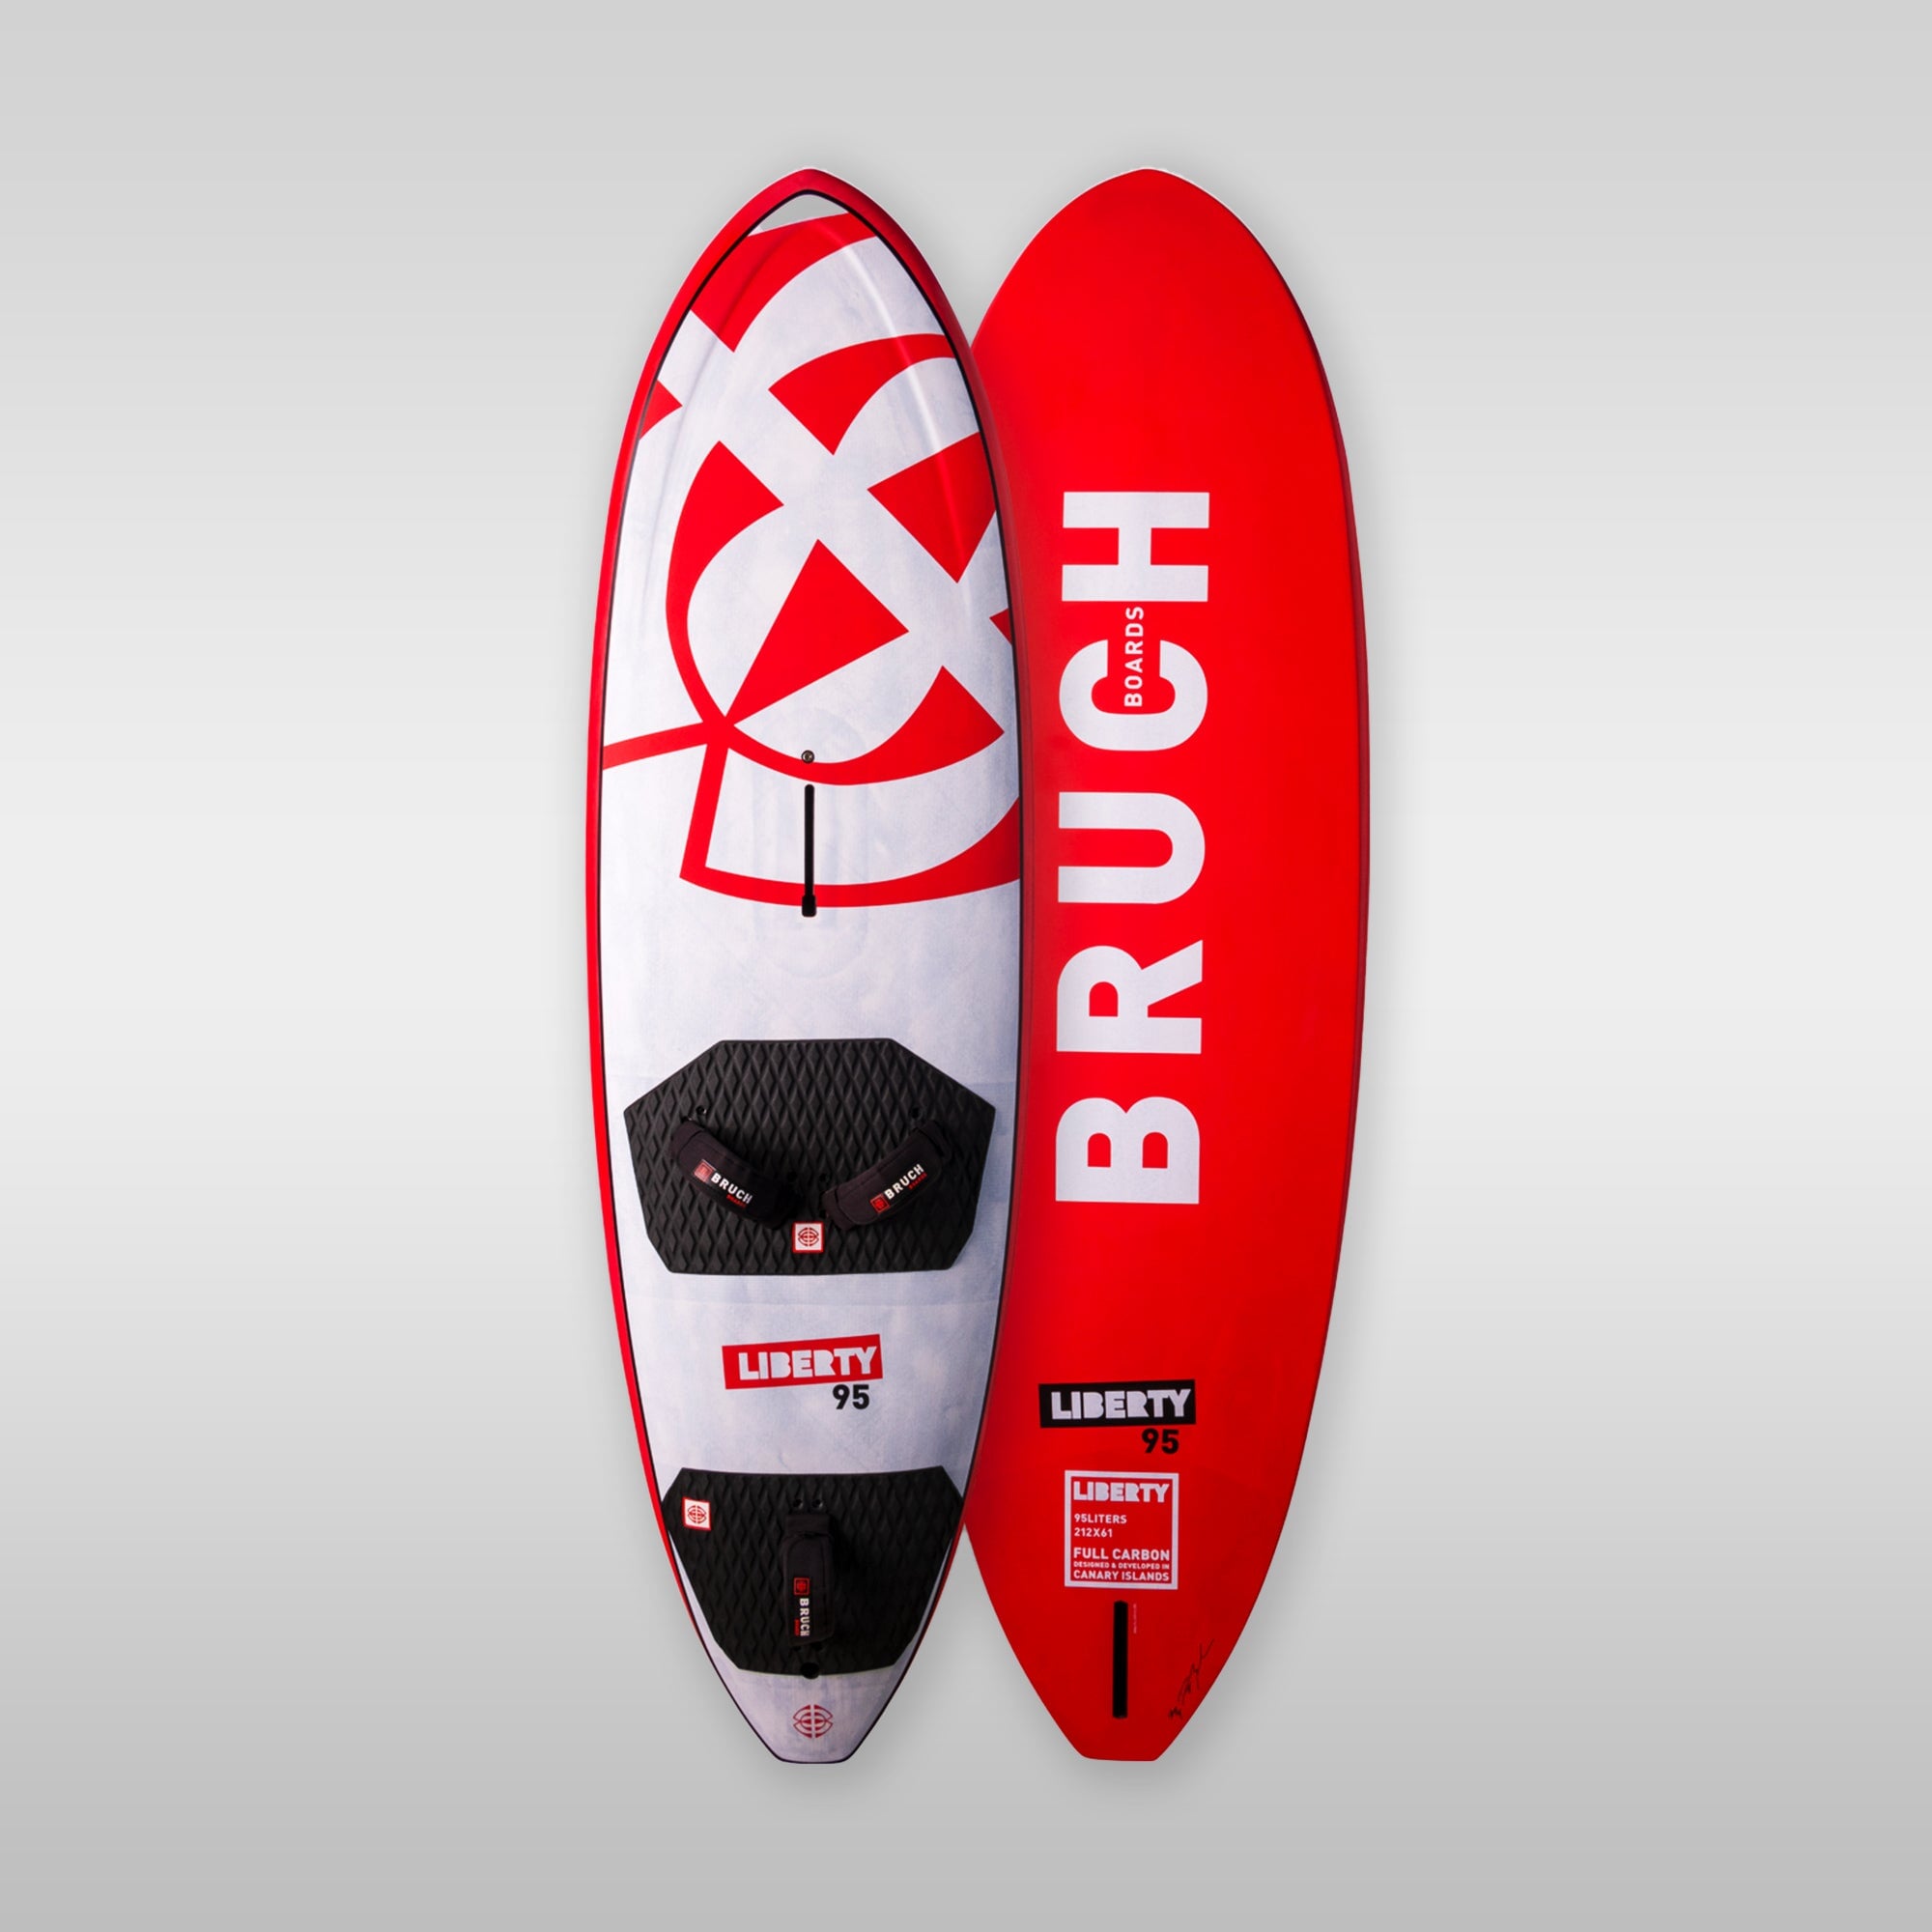 Windsurfshop windsurfwinkel windsurf-shop windsurf shop windsurfing shop windsurfing BruchBoards by Dany Bruch Liberty